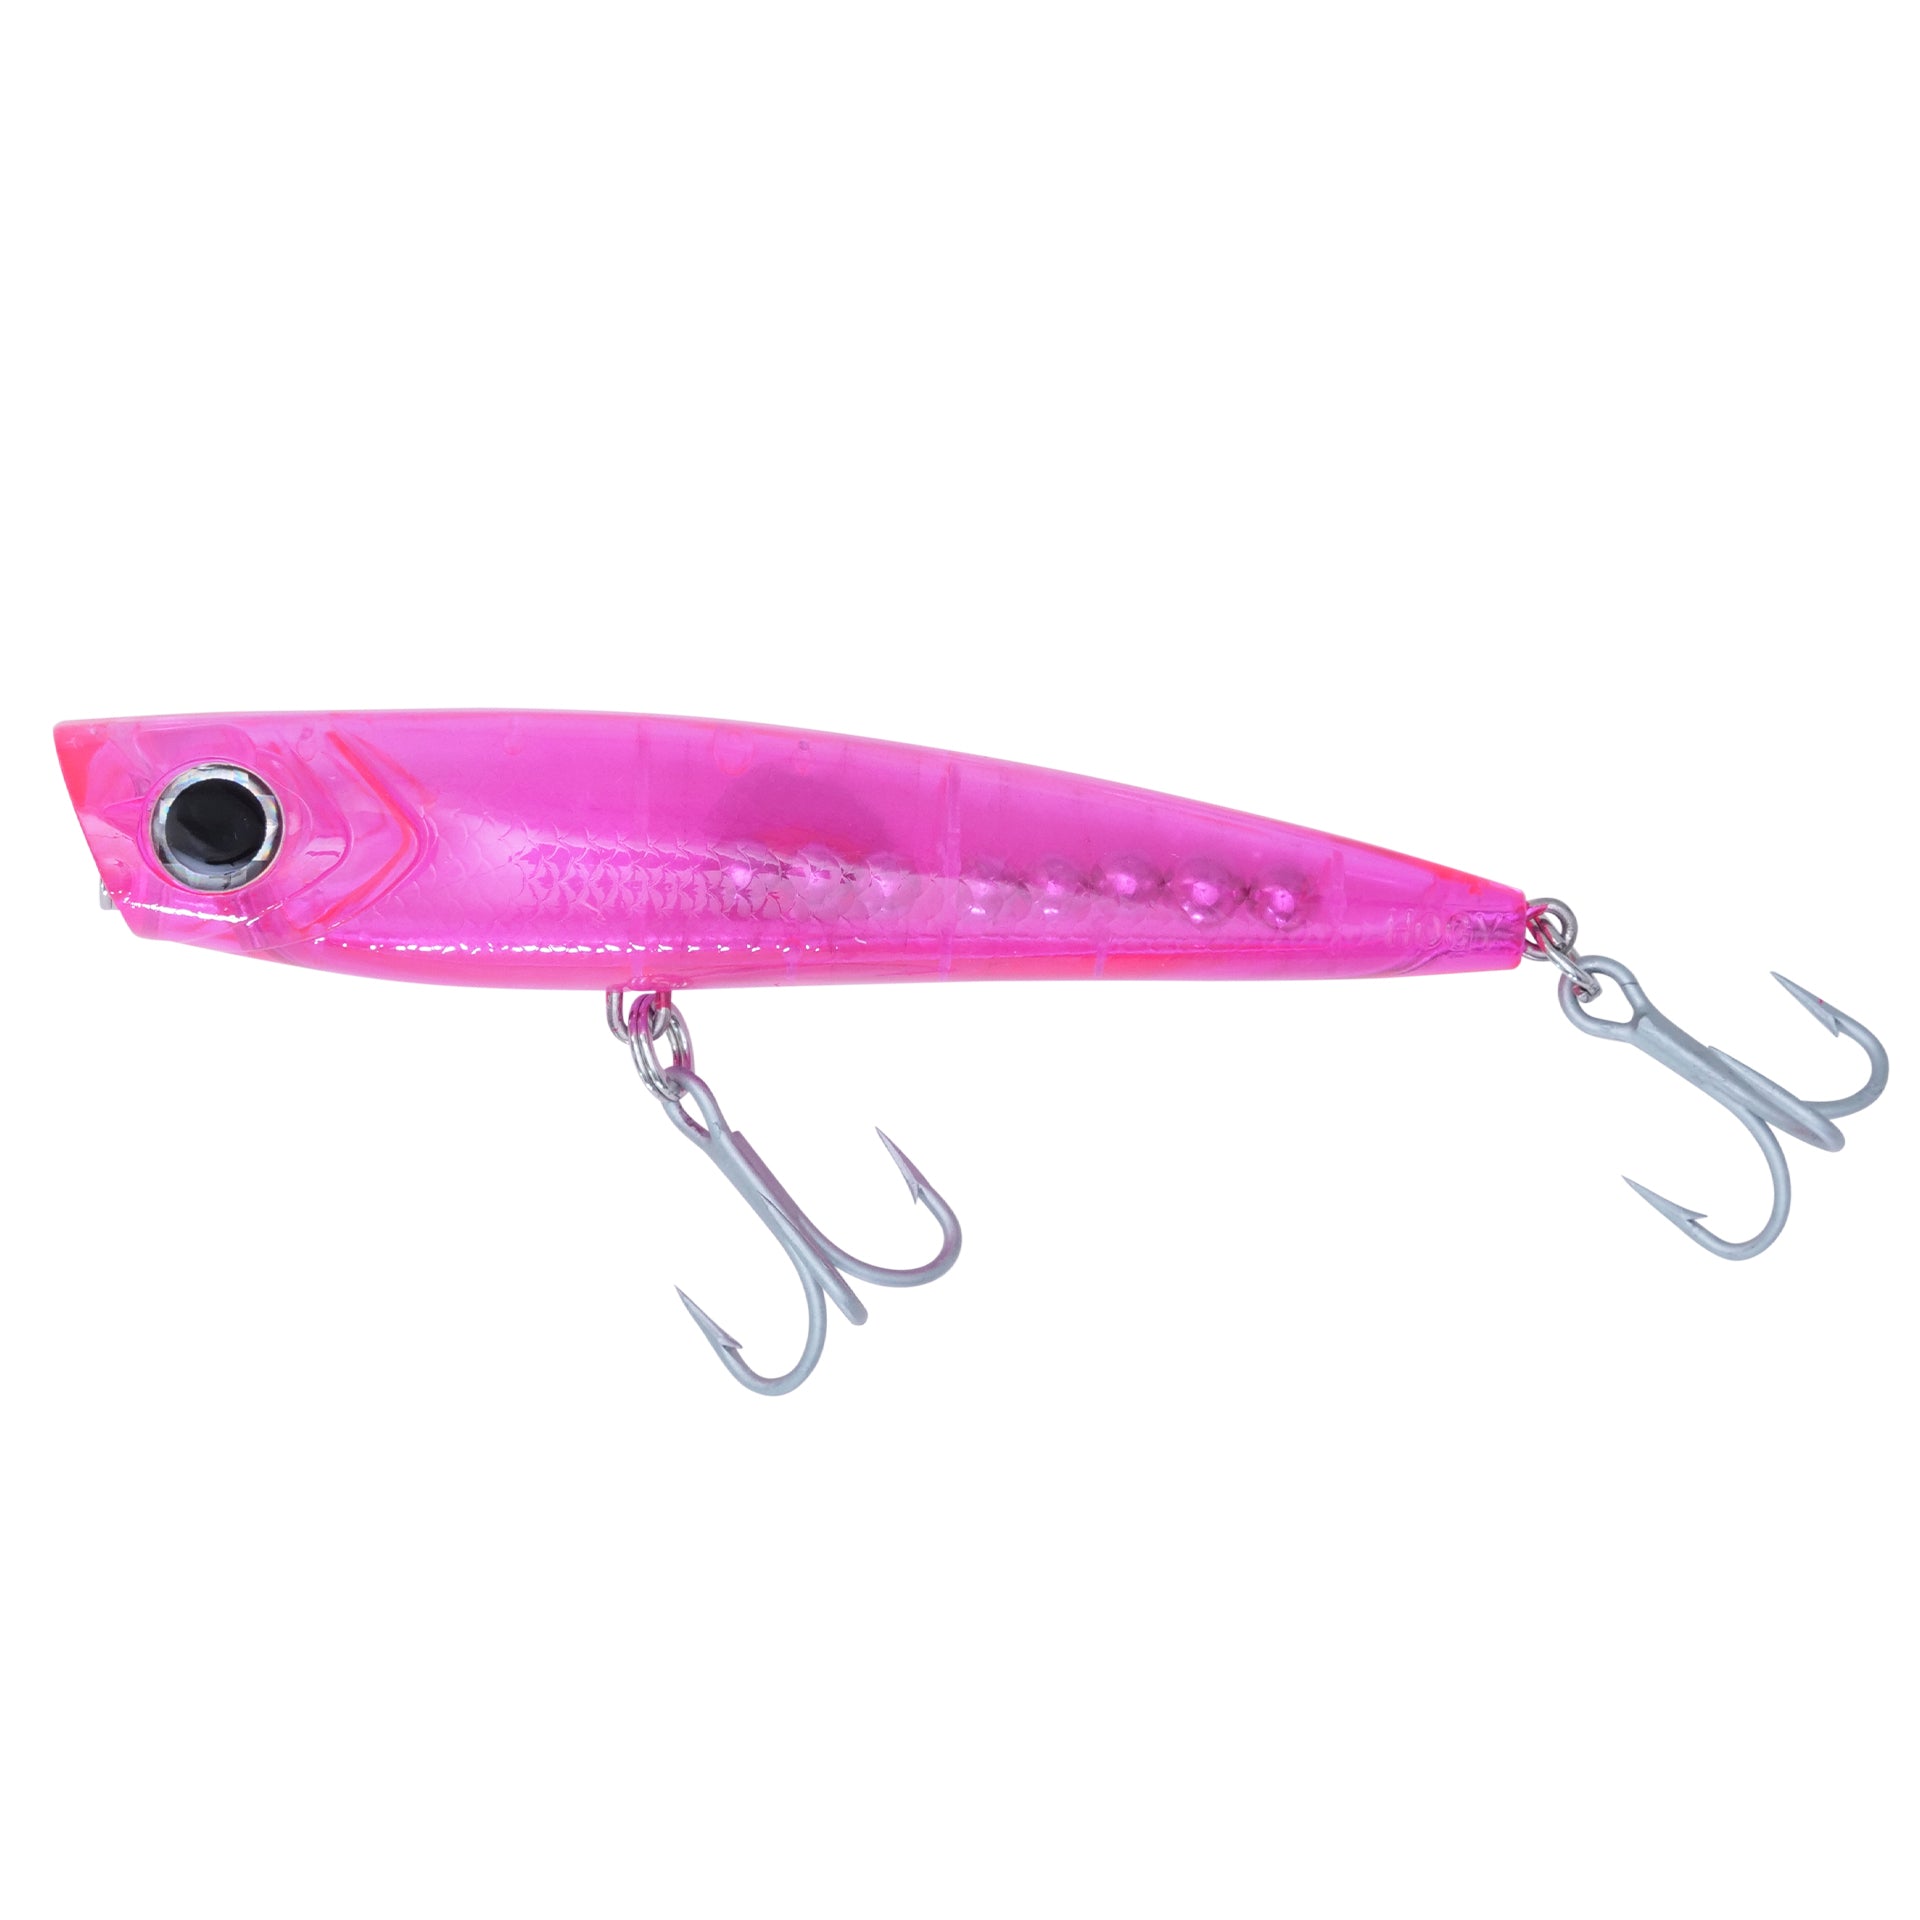 CMS Fishing Tackle - BEACHMASTER PENCIL POPPERS in stock. They are 8.75  inches long and weigh 3.25 ounces. They cast far!! Order yours before  they're gone. We still have plenty of colors